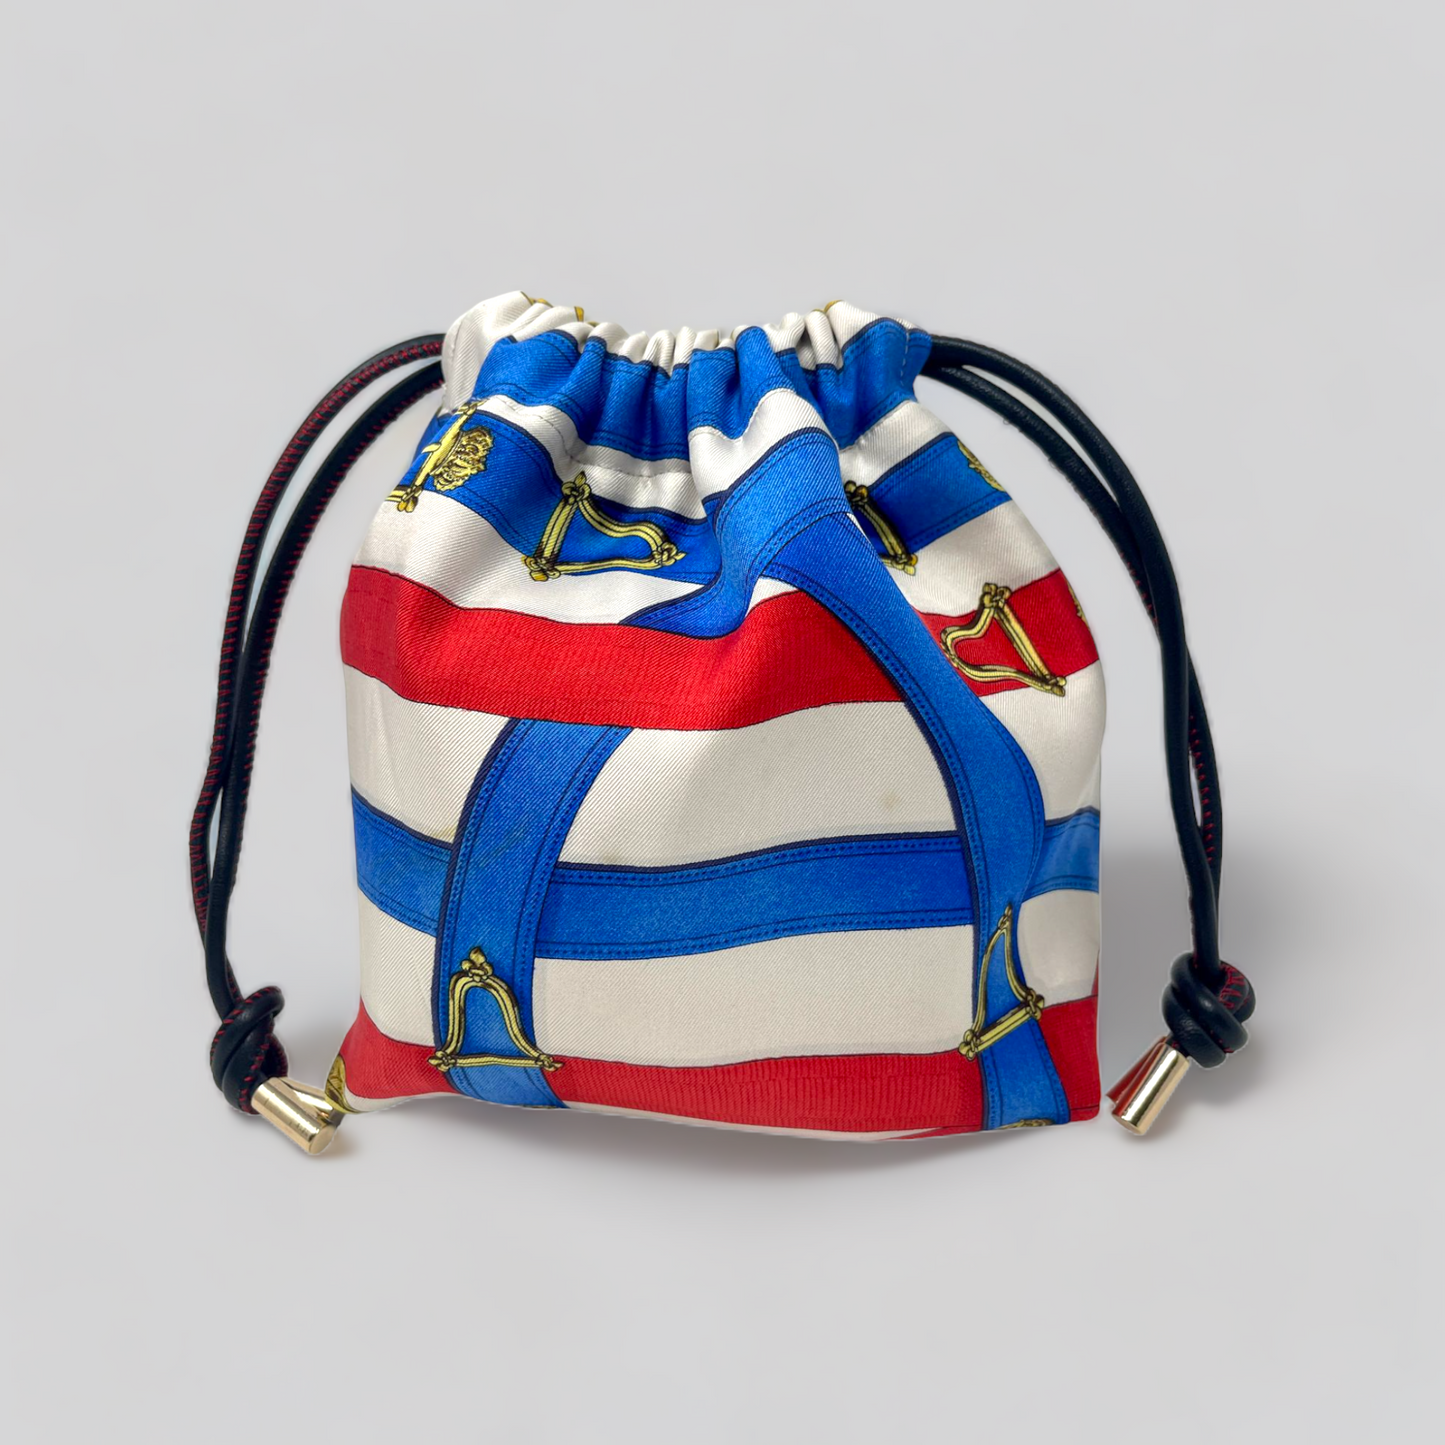 NEW TO SALE* Red White and Blue Ceinture Bag